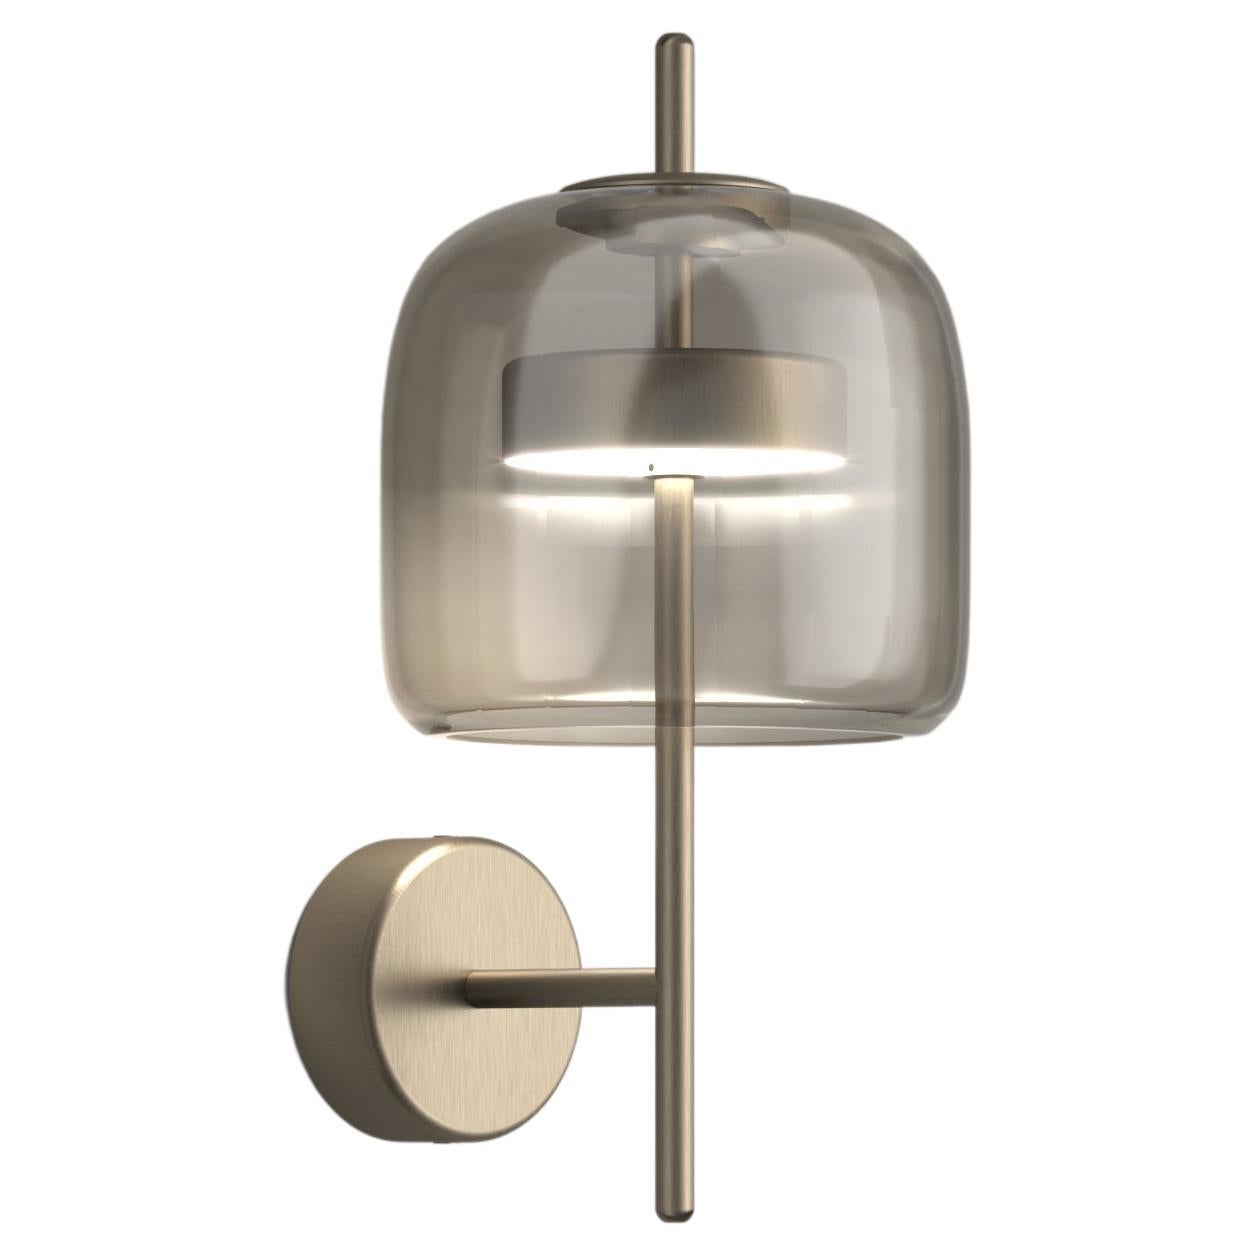 Vistosi Jube Wall Sconce in Smoky Transparent with Matt Steel Finish For Sale